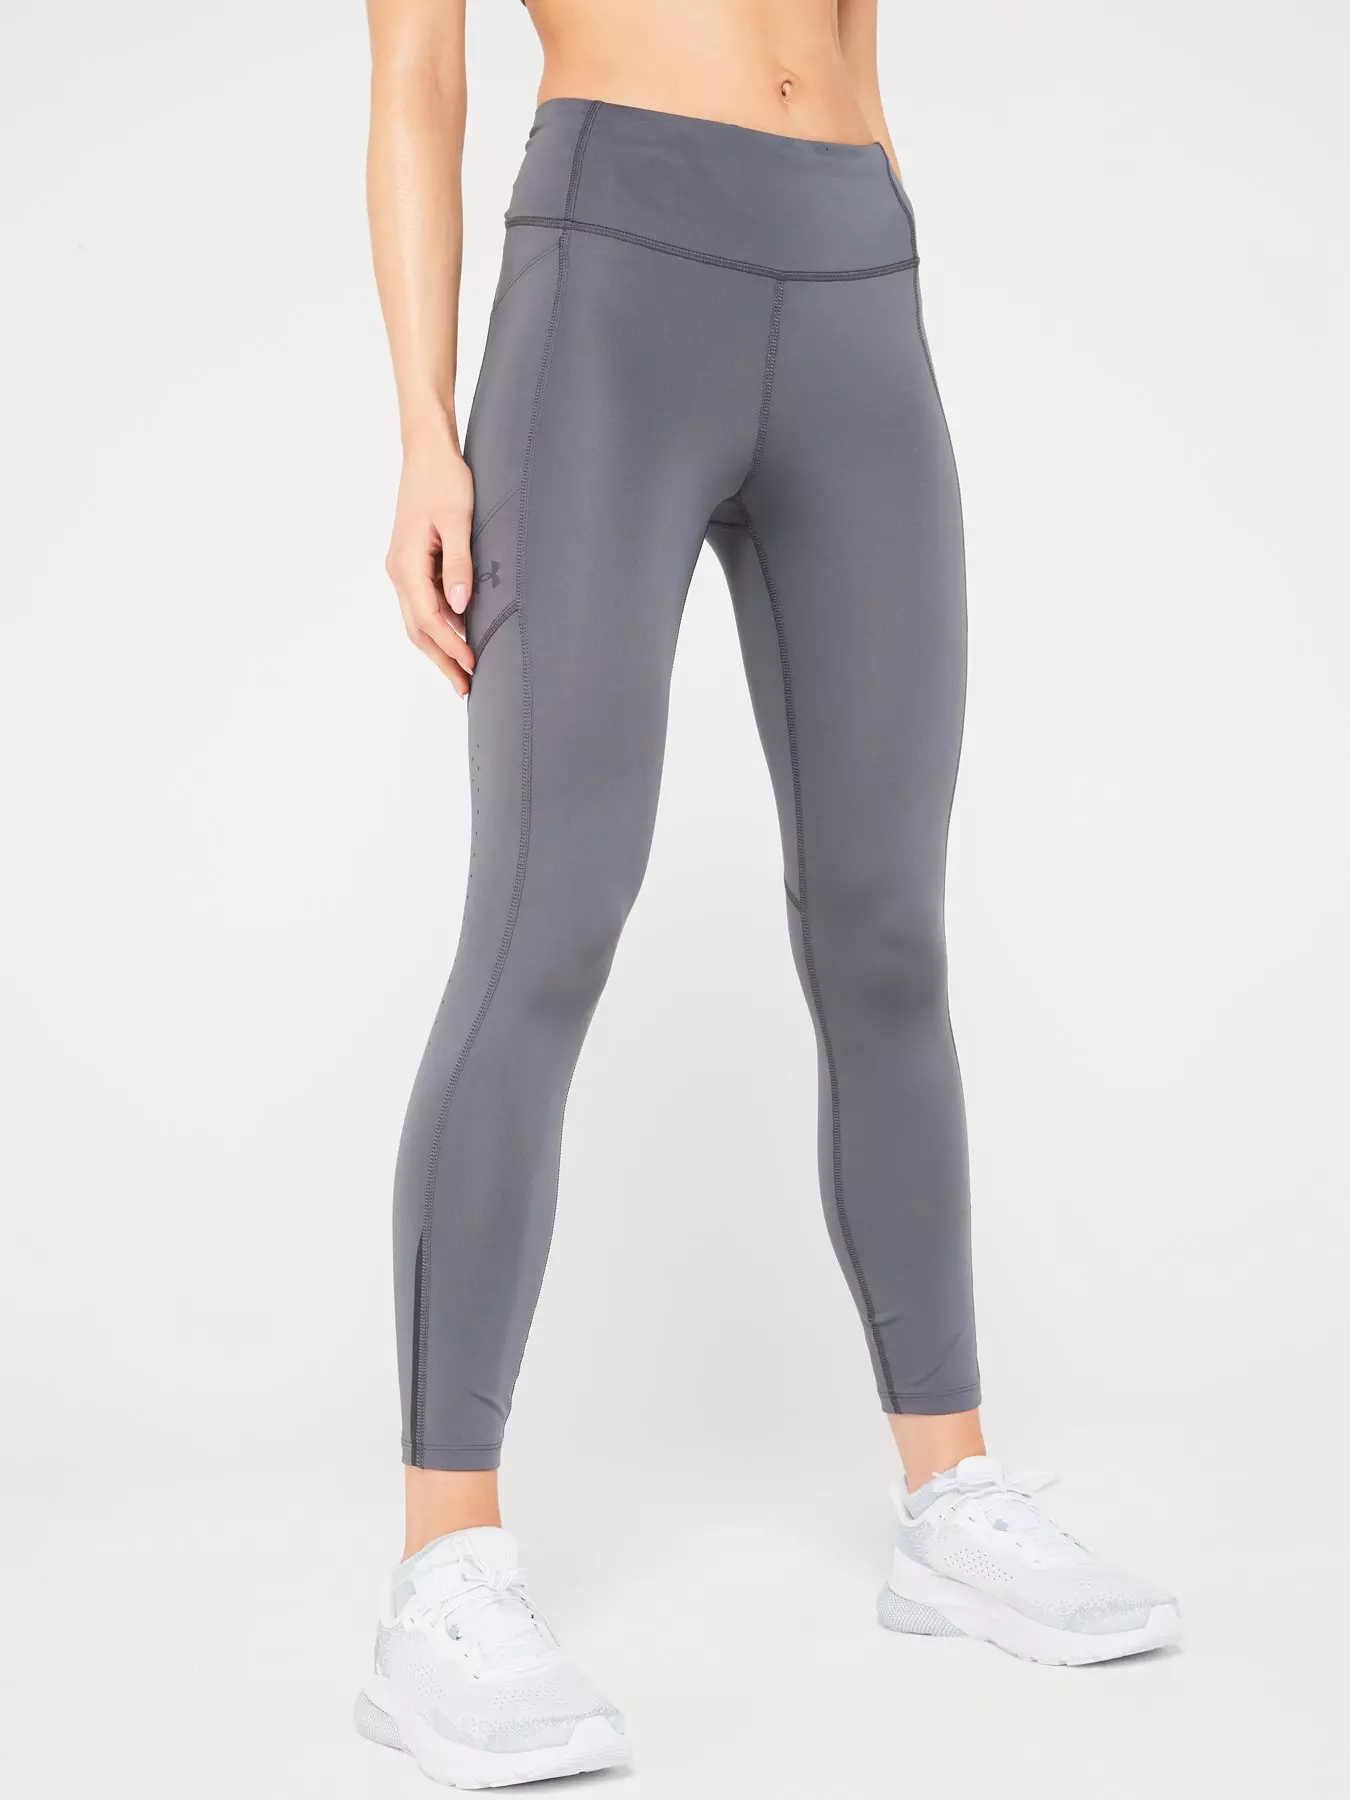 Under Armour, Pants & Jumpsuits, Under Armour Womens Fly Fast 2 Mesh 78 Leggings  Small